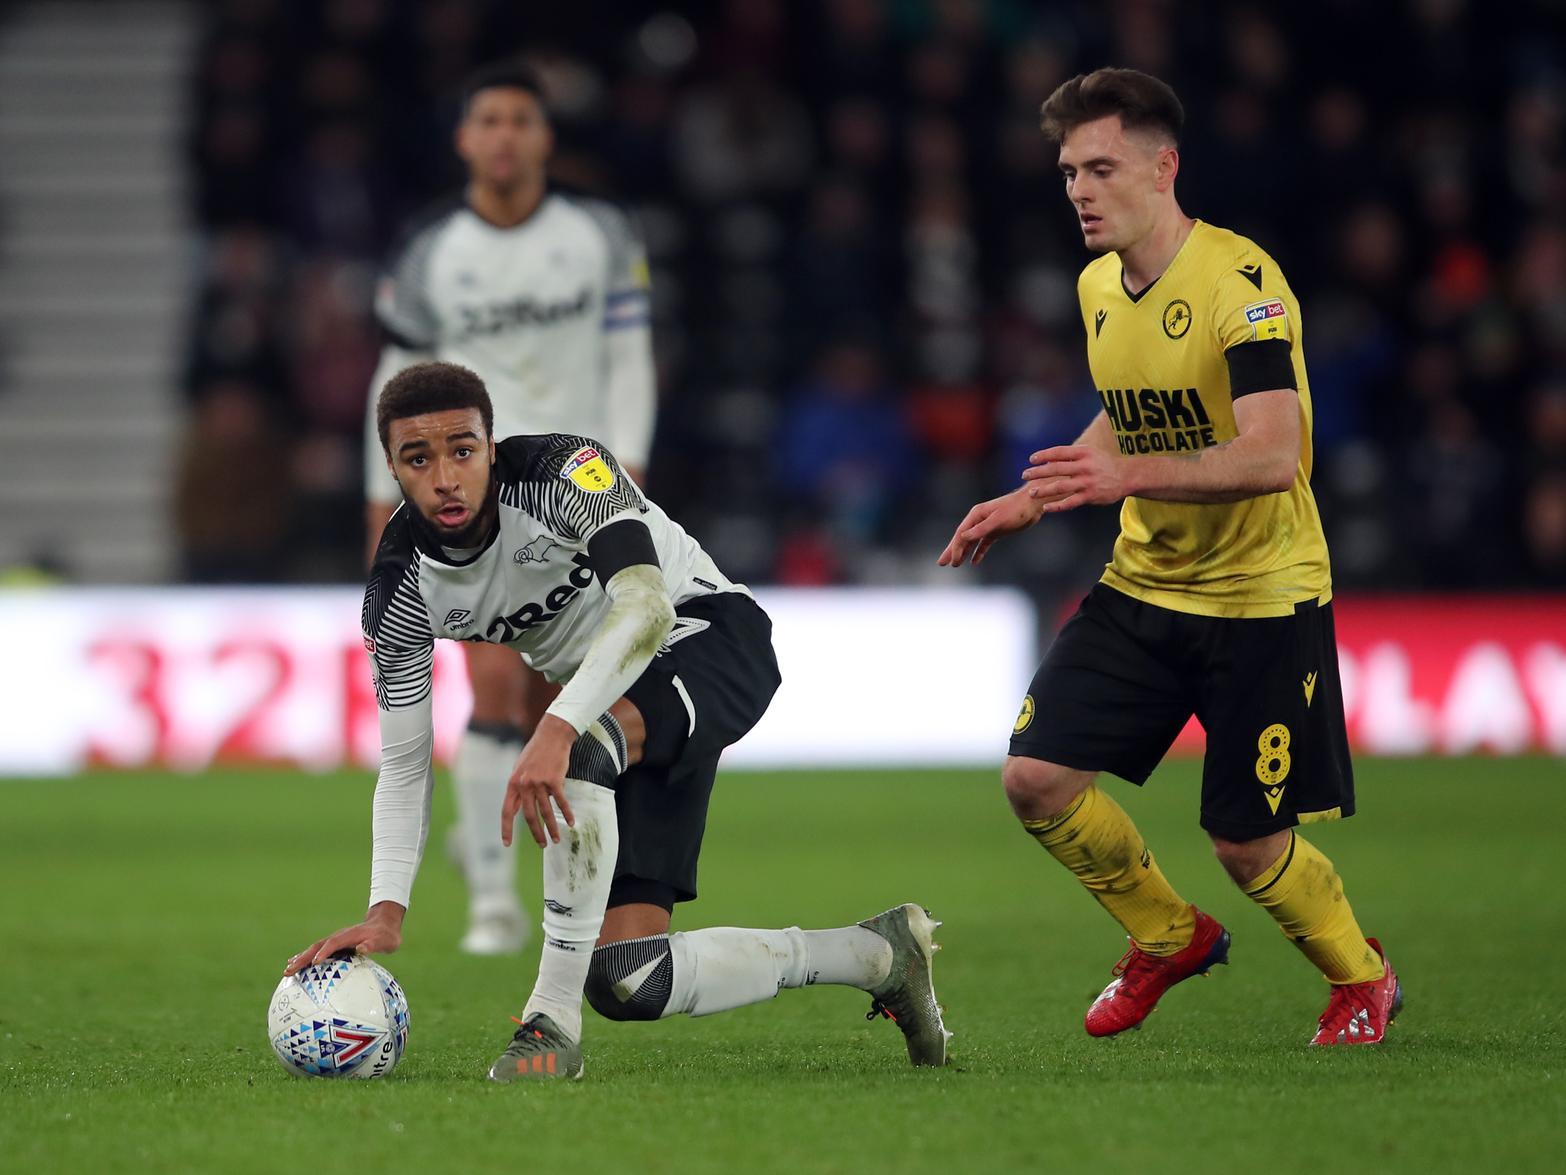 West Ham, Crystal Palace and Brighton are all said to be keen on Derby County defender Jayden Bogle, who made an impressive 11 assists in the division last season. (Telegraph)